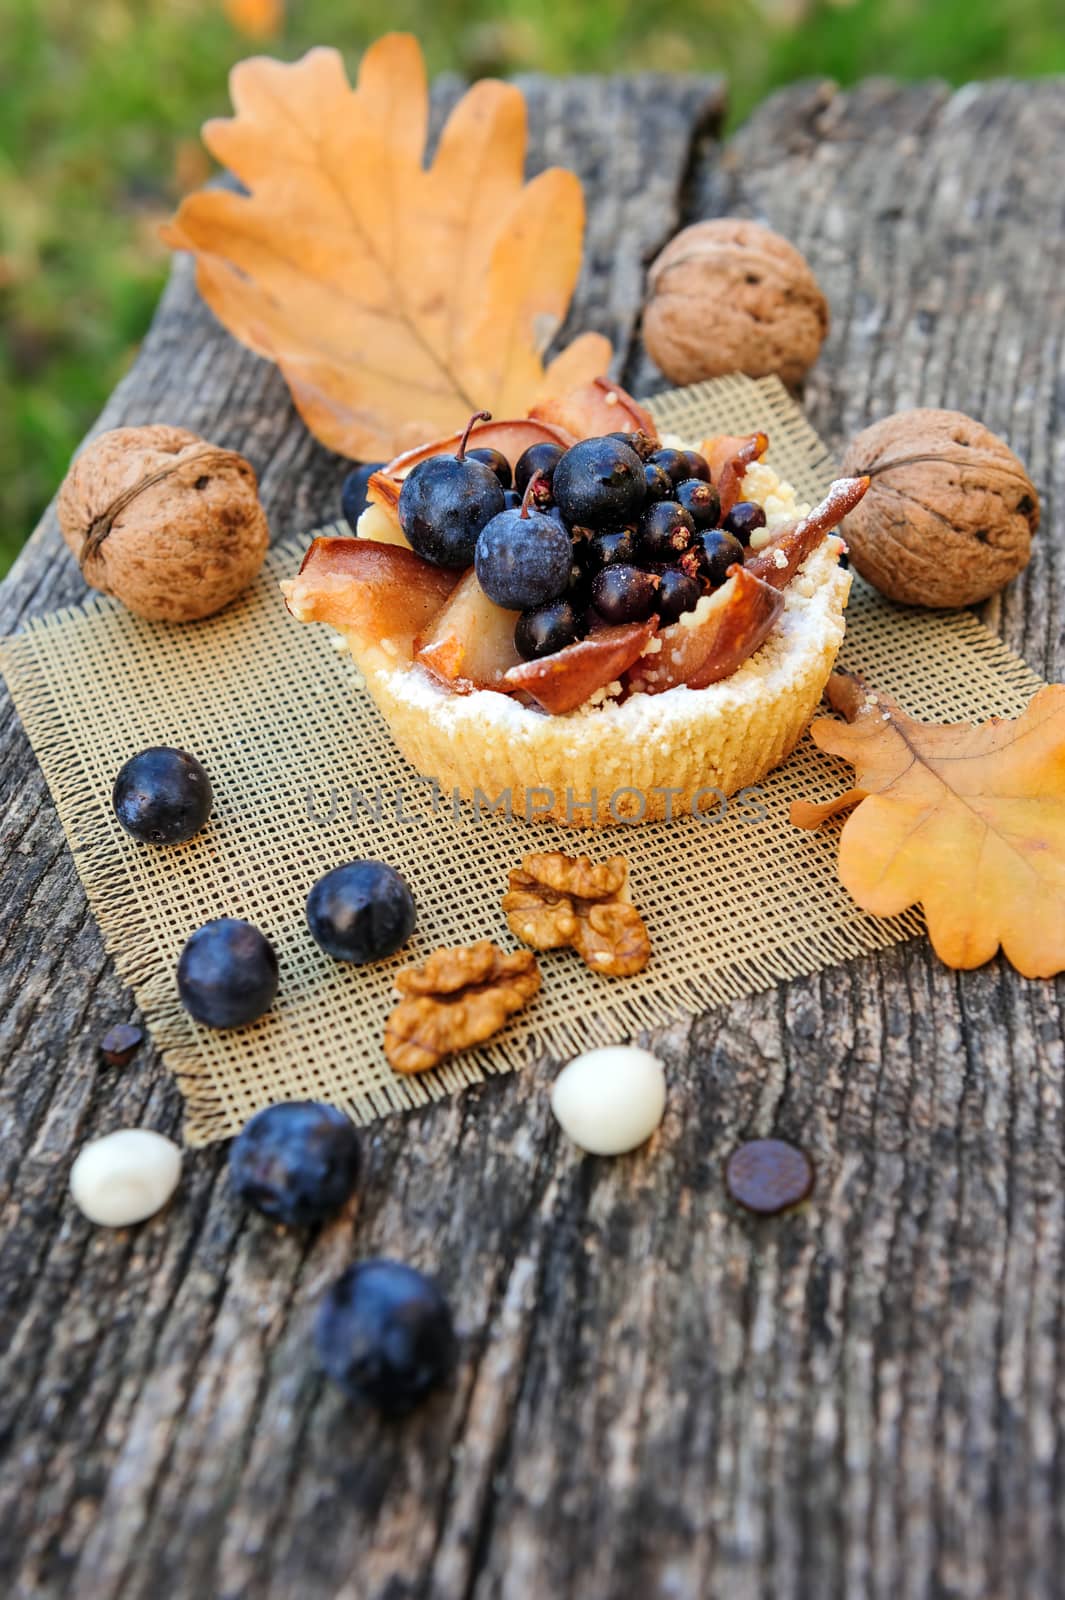 Romantic autumn still life with basket cake, walnuts, blackthorn berries and leaves, in cold colors